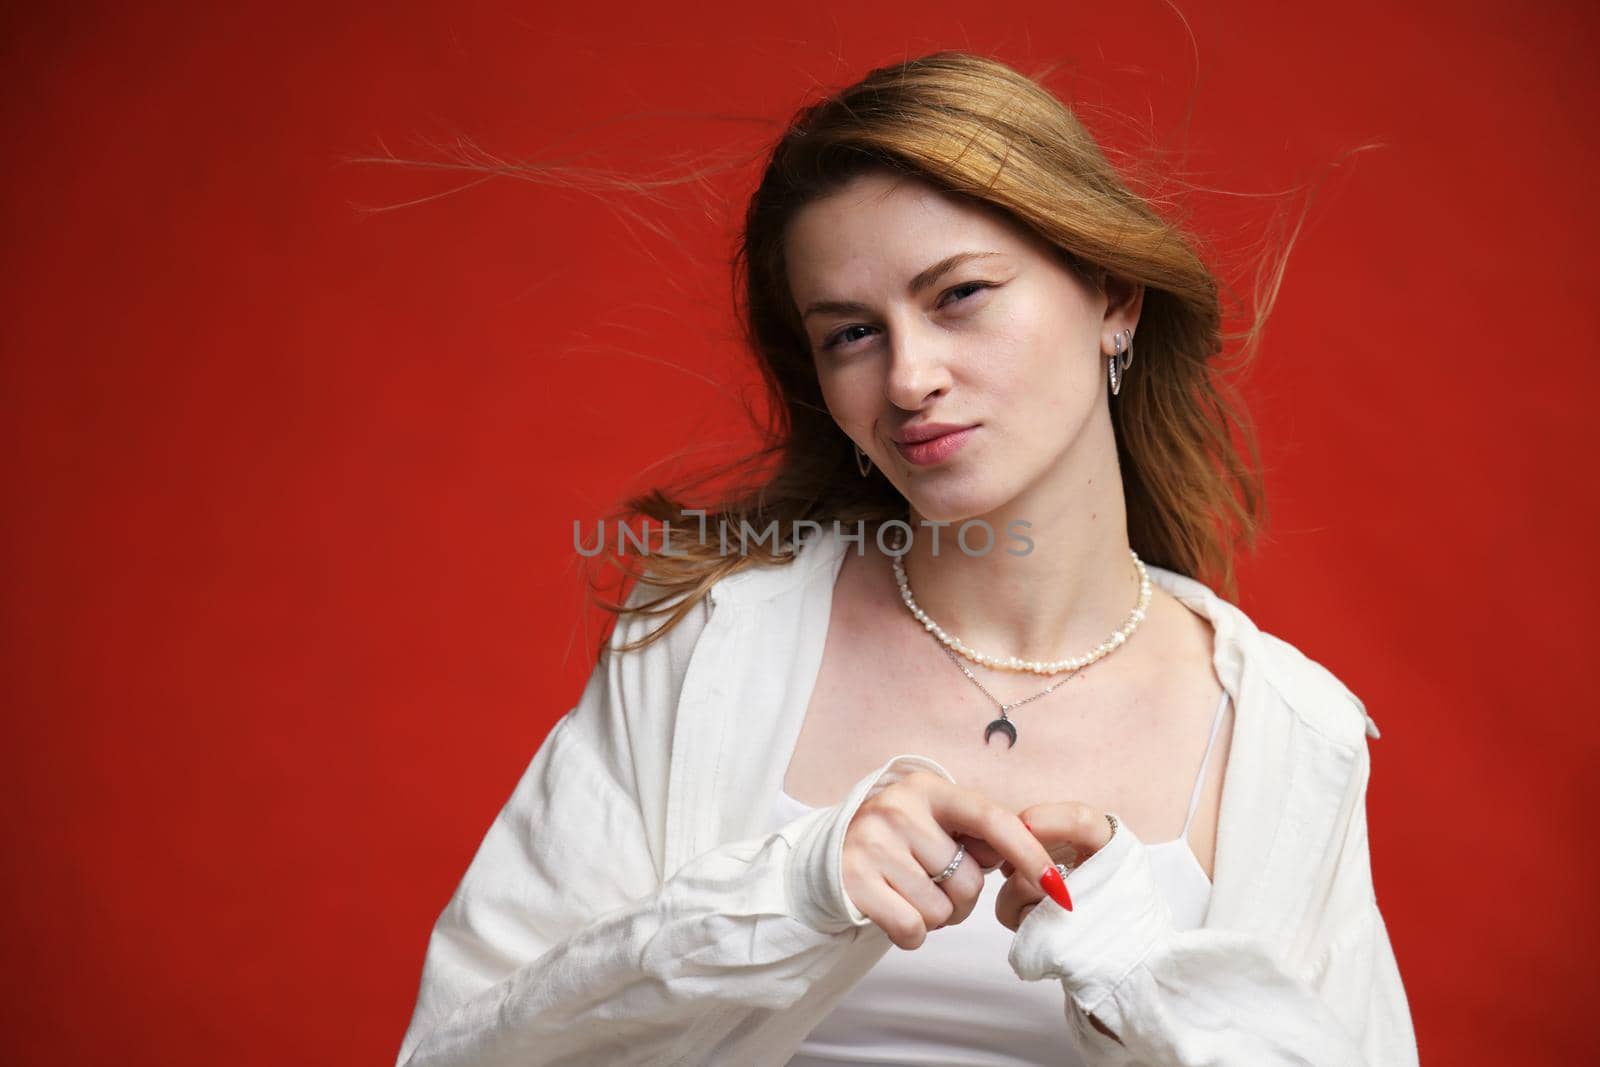 young european girl portrait on red background in studio by chichaevstudio